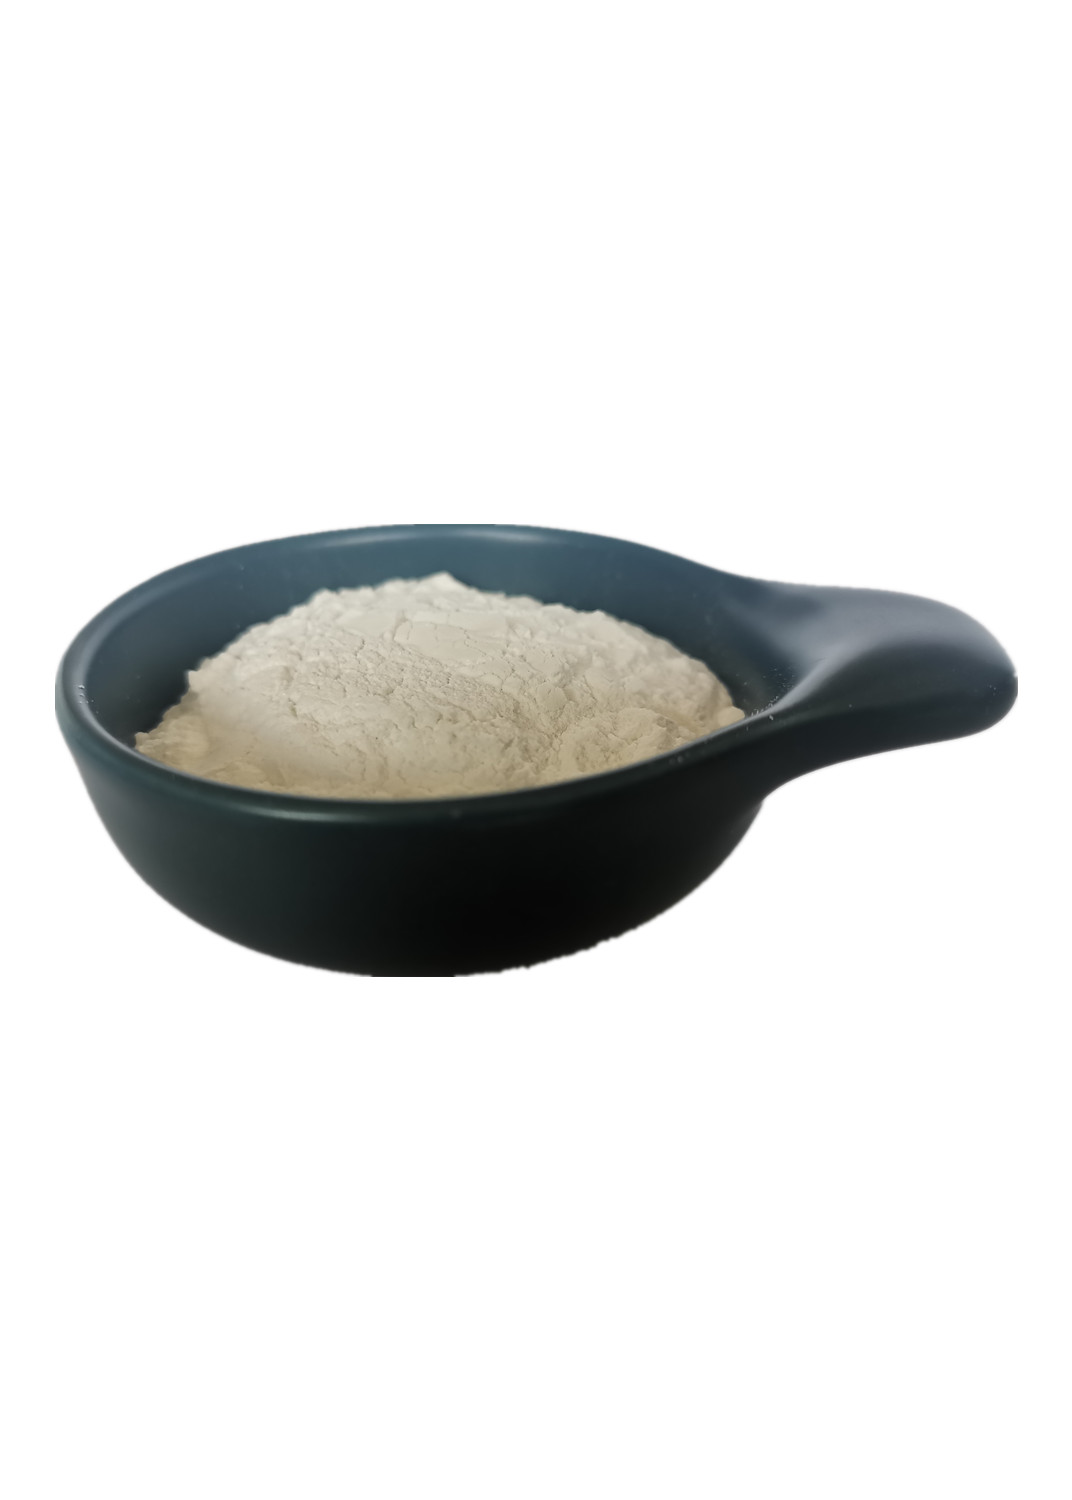 China Manufacturer for Price Diatomite - swimming pool calcined diatomaceous earth for water purification water treatment – Yuantong